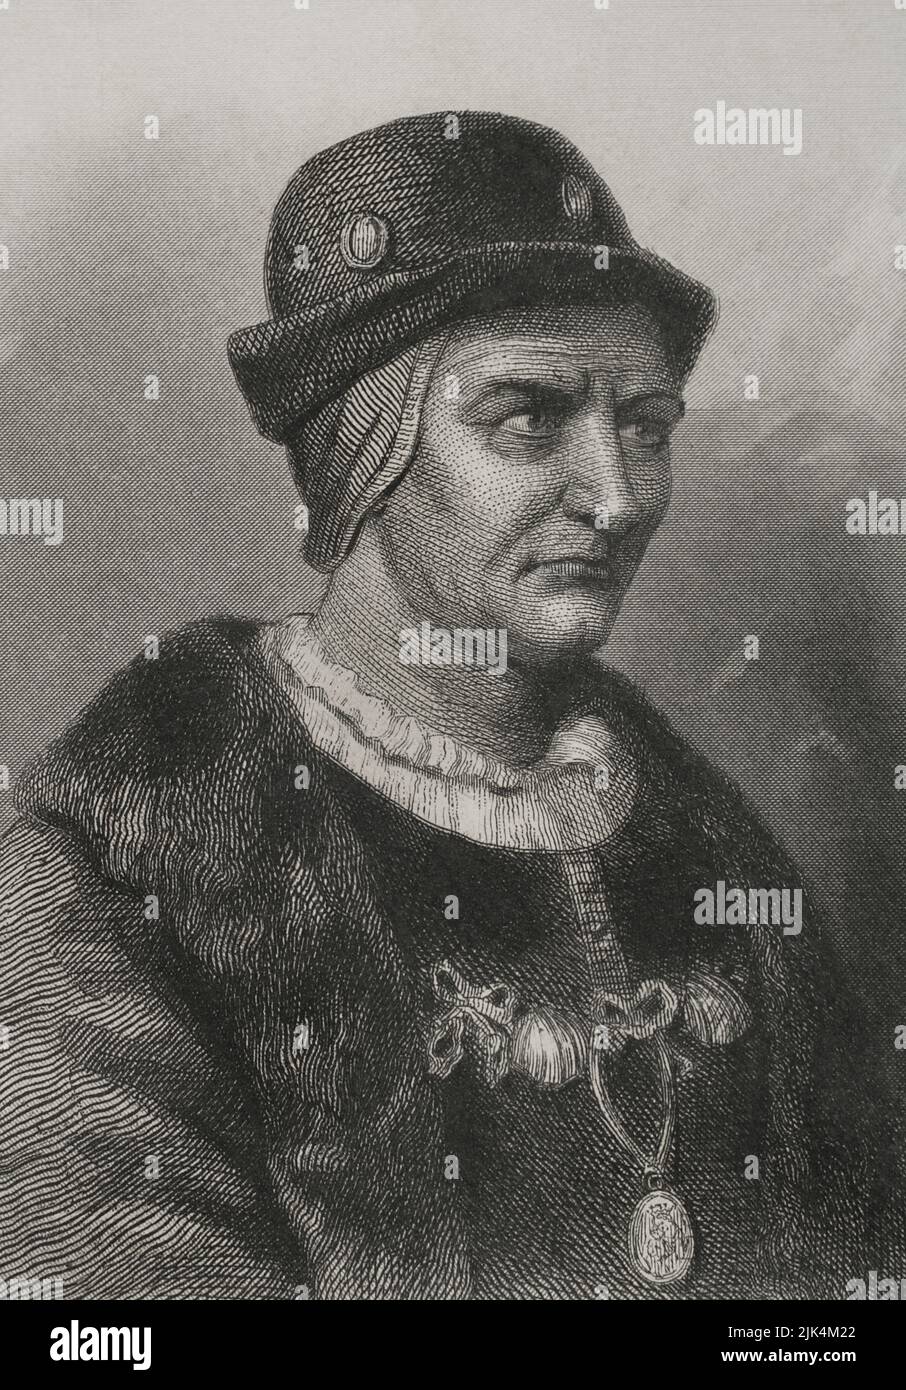 Louis XI (1423-1483), nicknamed 'the Prudent'. King of France (1461-1483). Portrait. Engraving by Geoffroy. 'Historia Universal', by César Cantú. Volume IV, 1856. Stock Photo